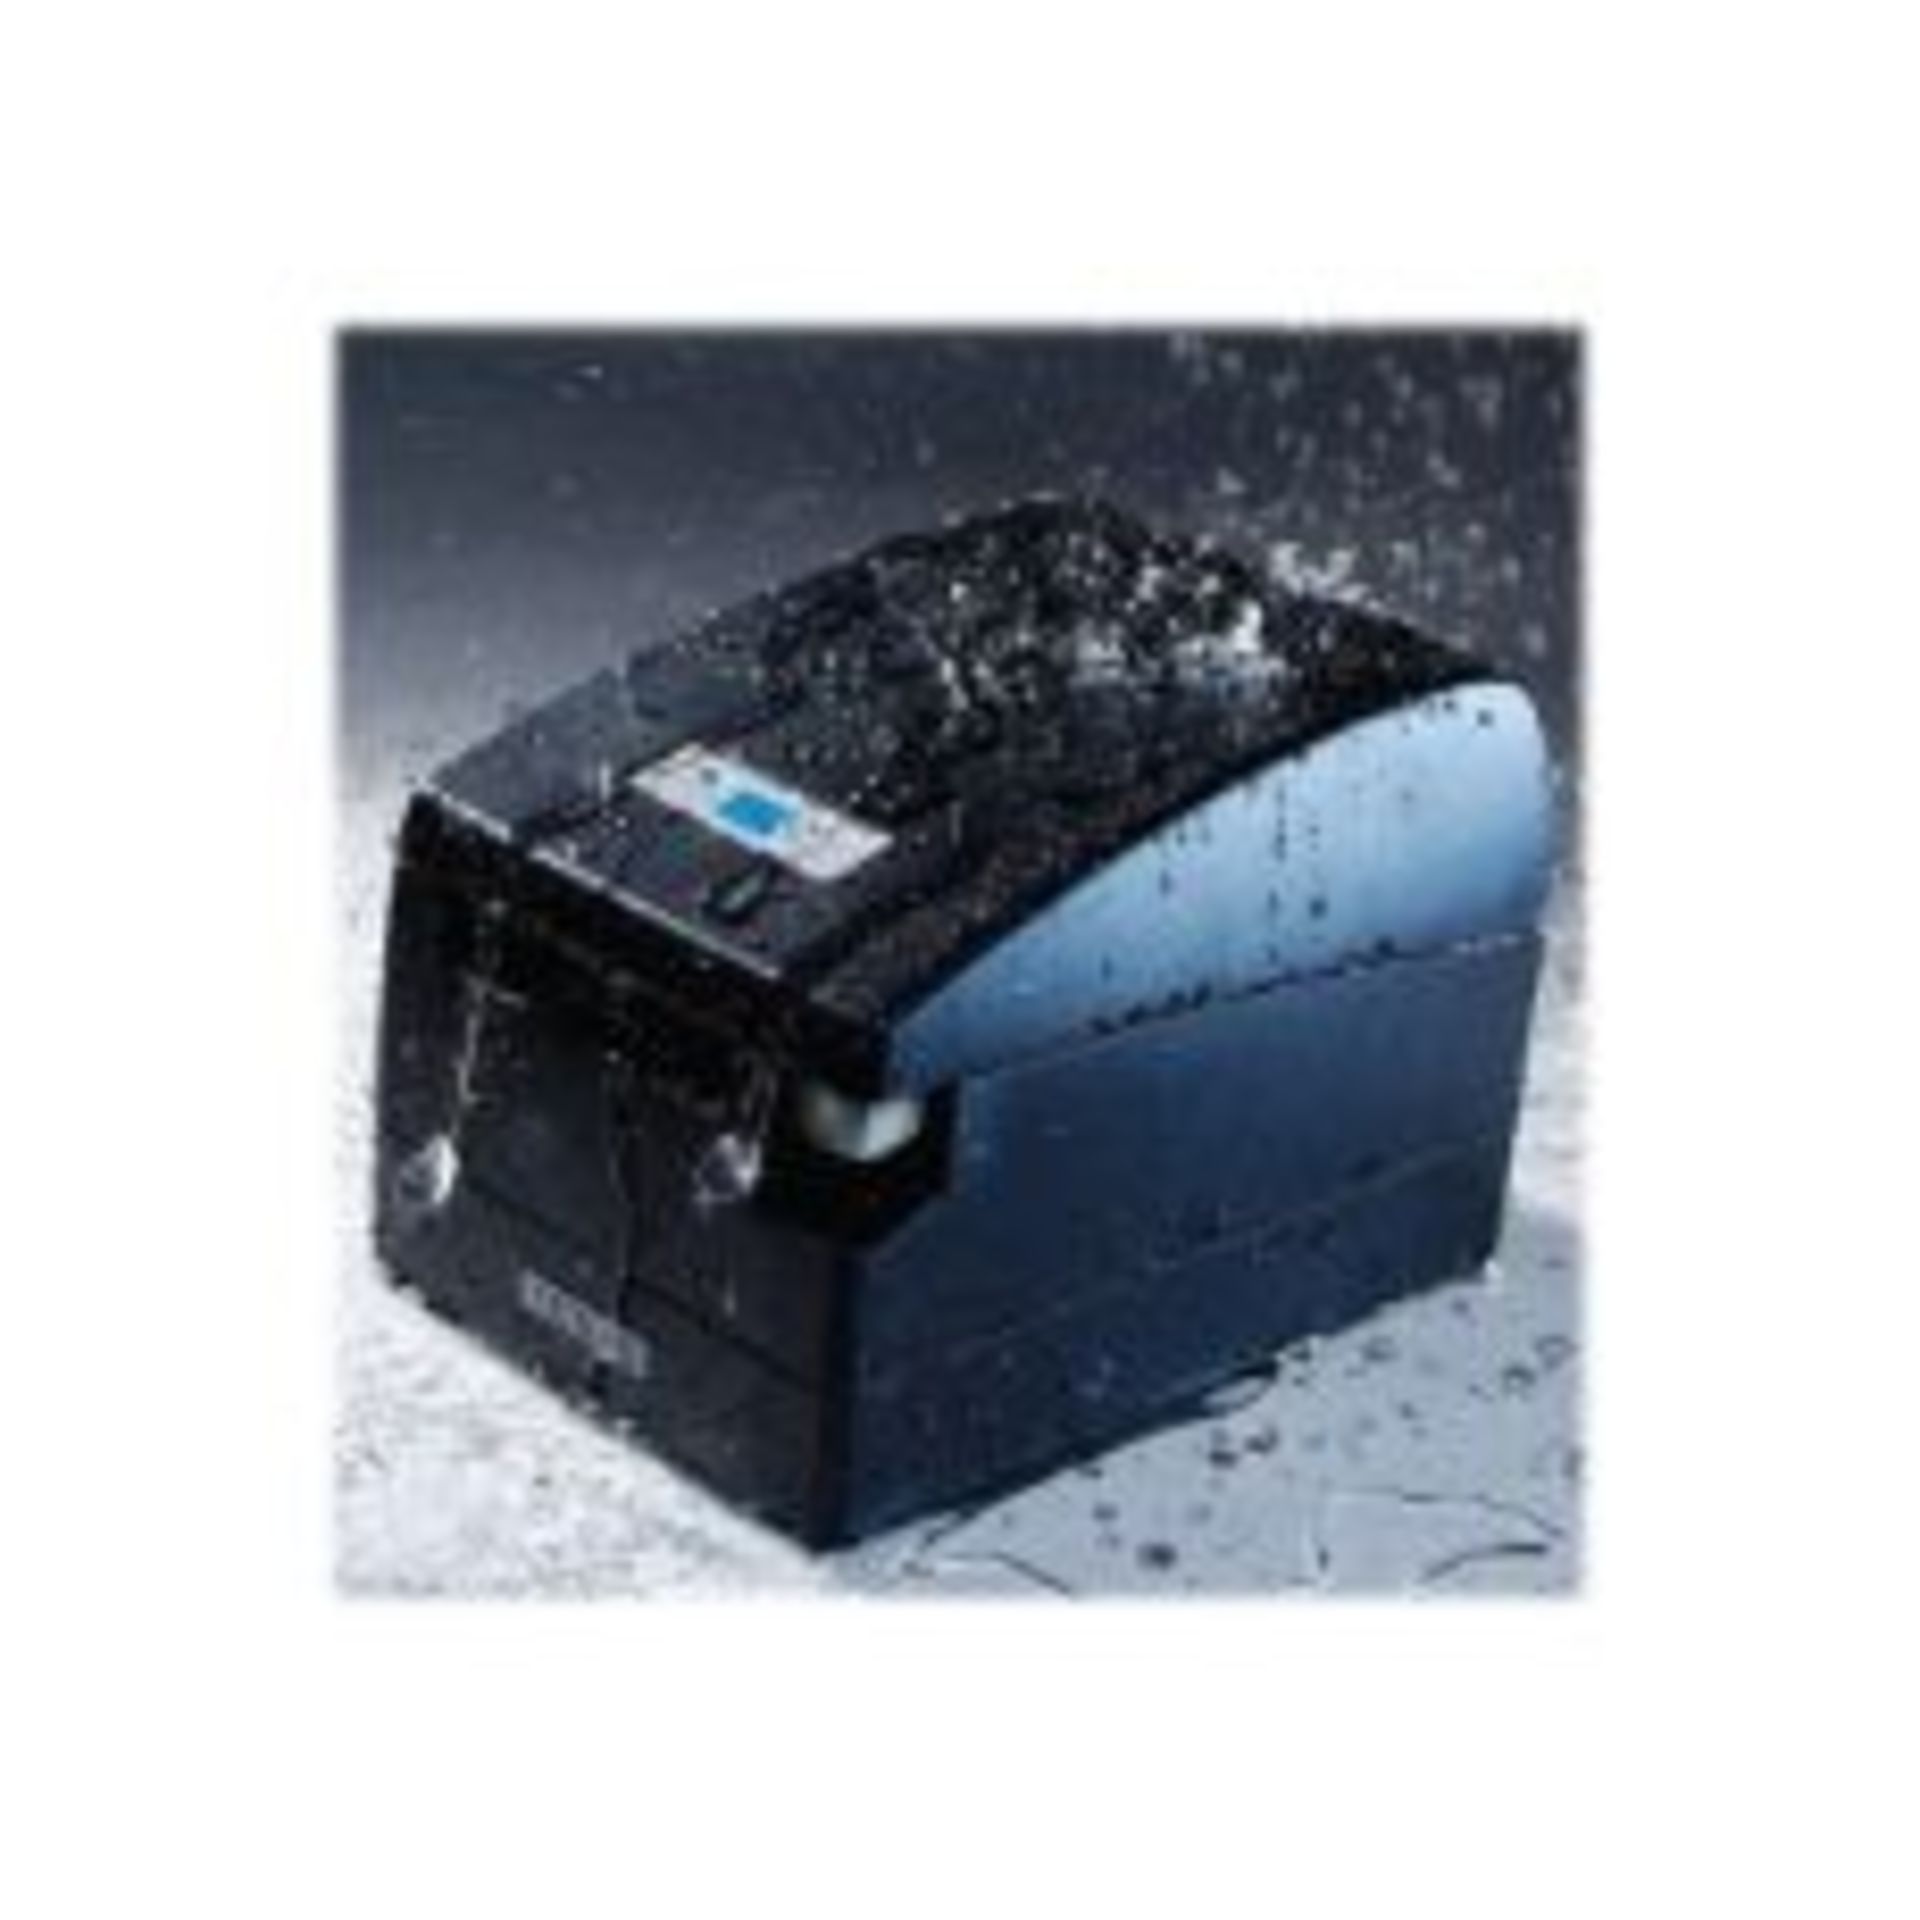 1 x Citizen CT-S2000 Thermal Receipt EPOS Printer - High Speed USB Printer - With Test Print - Two - Image 2 of 2